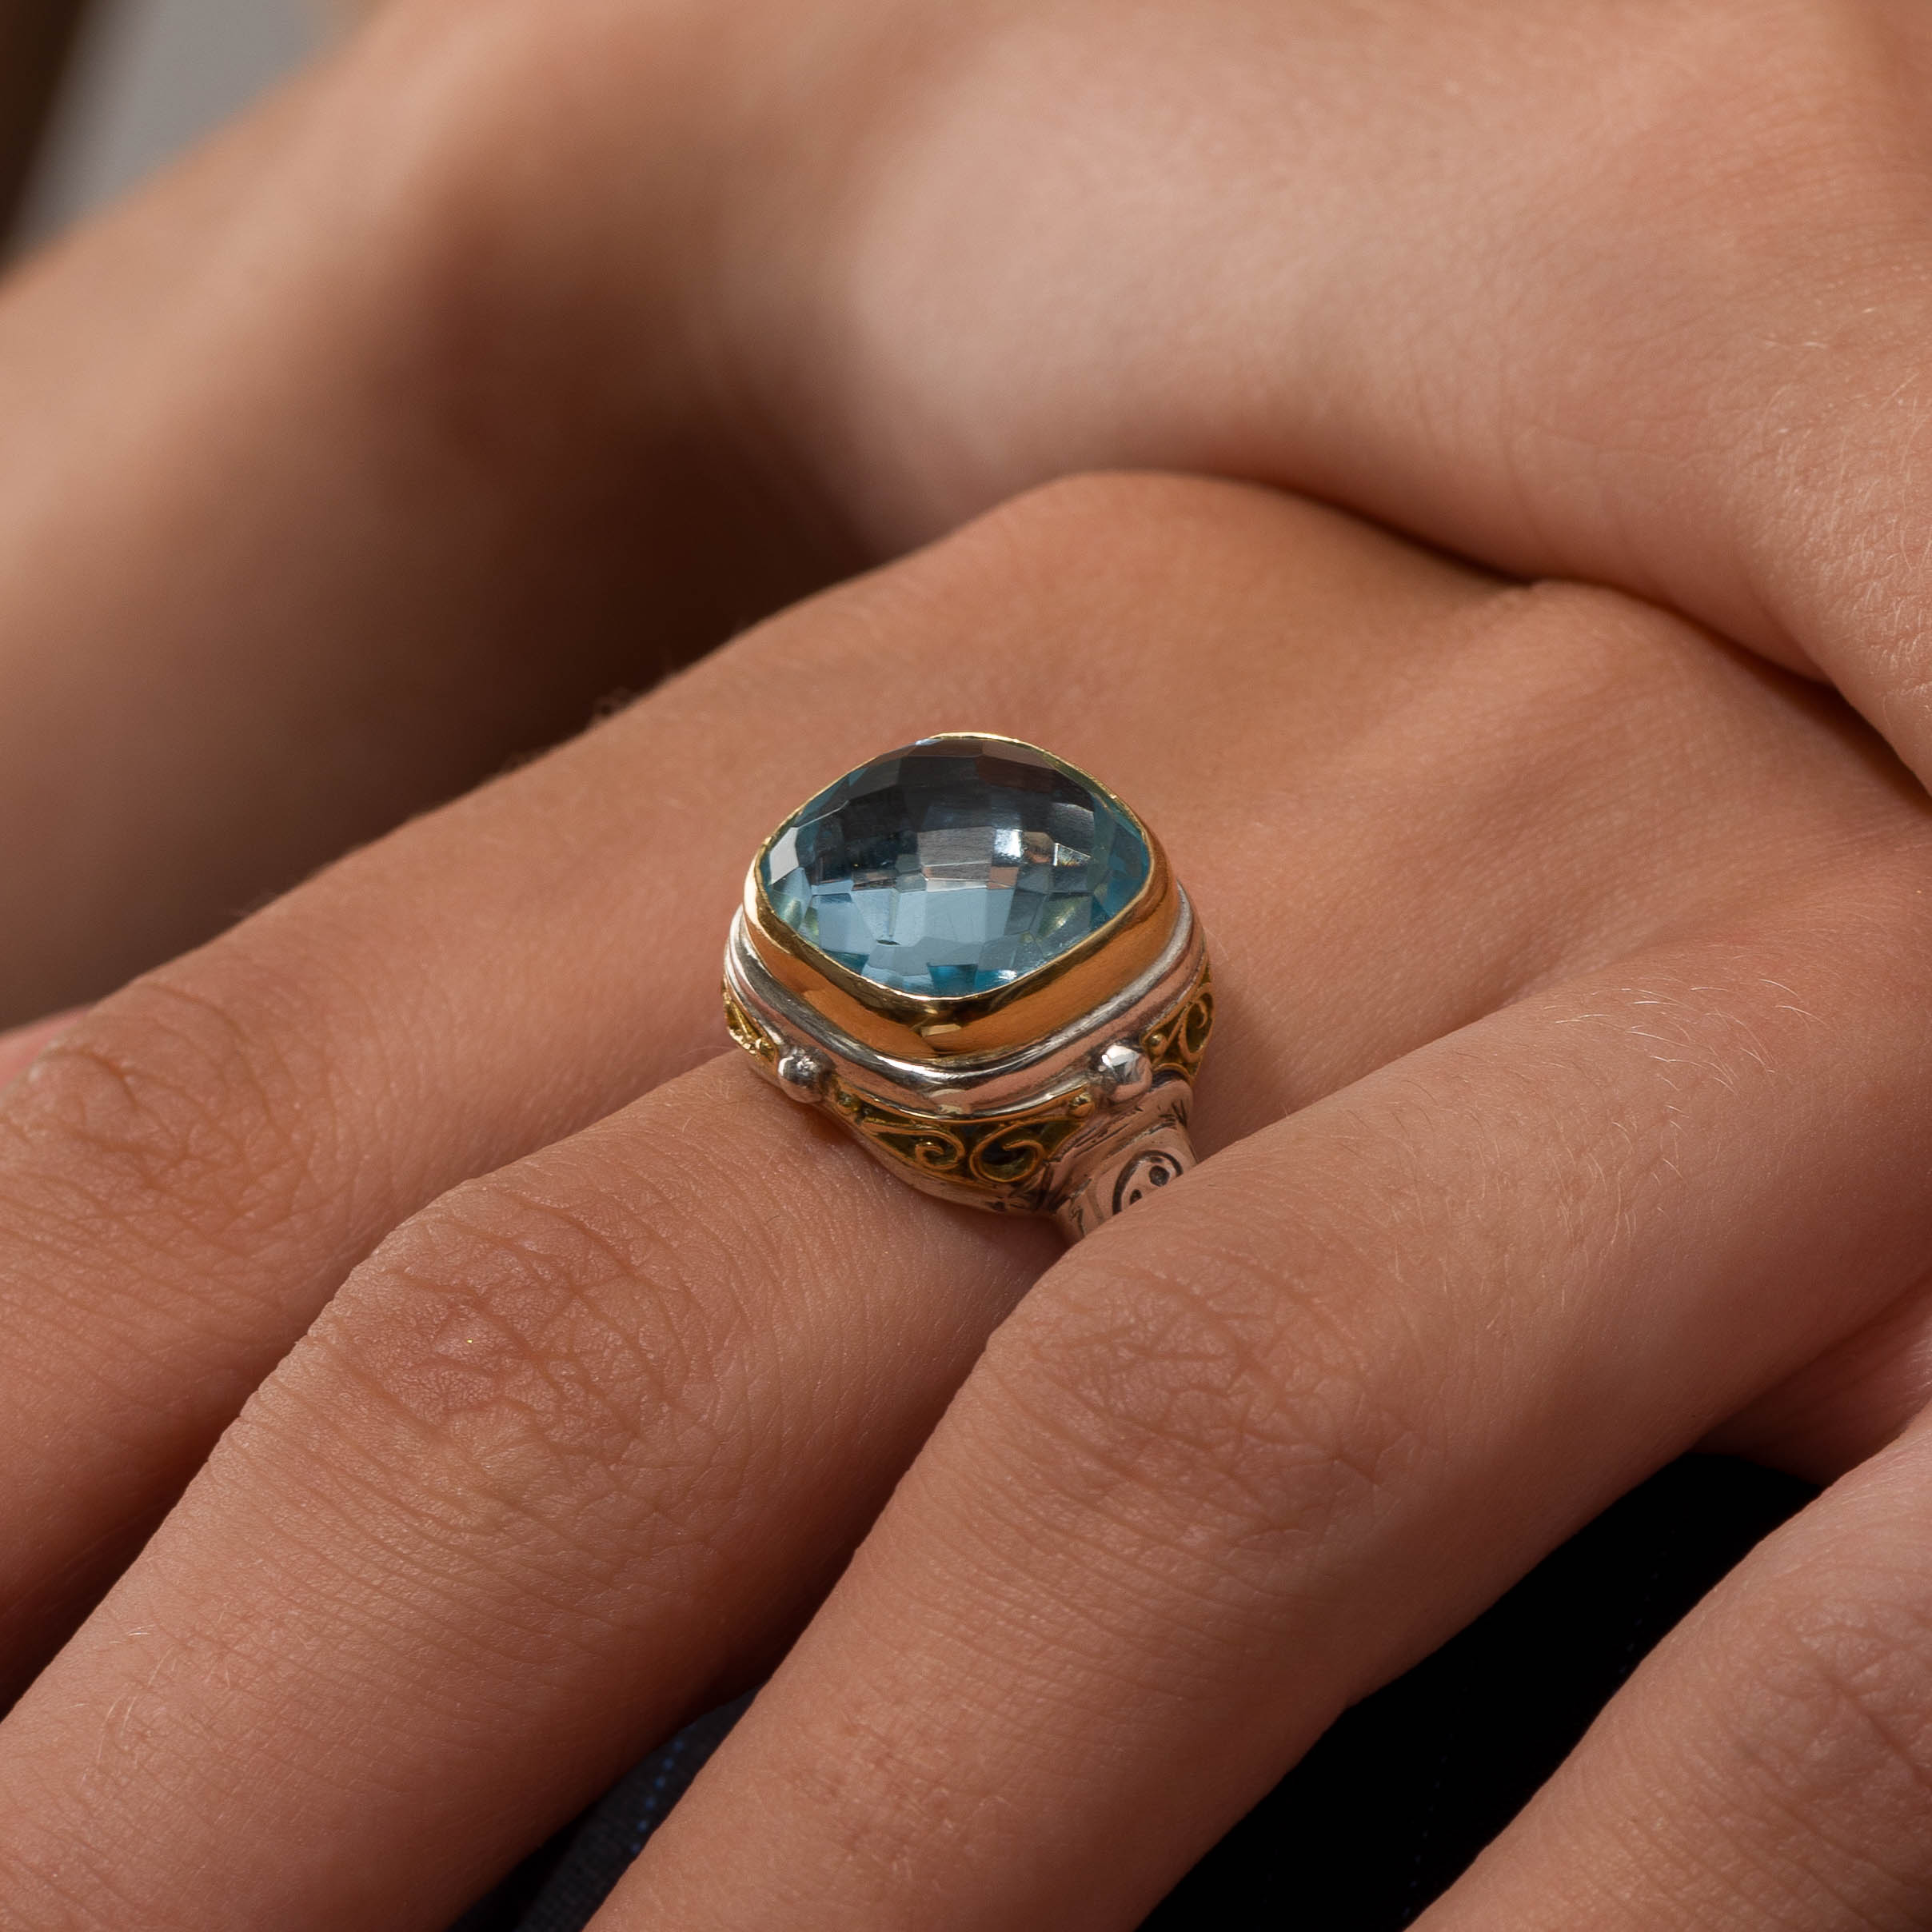 Statement ring in 18K Gold and Sterling Silver with topaz